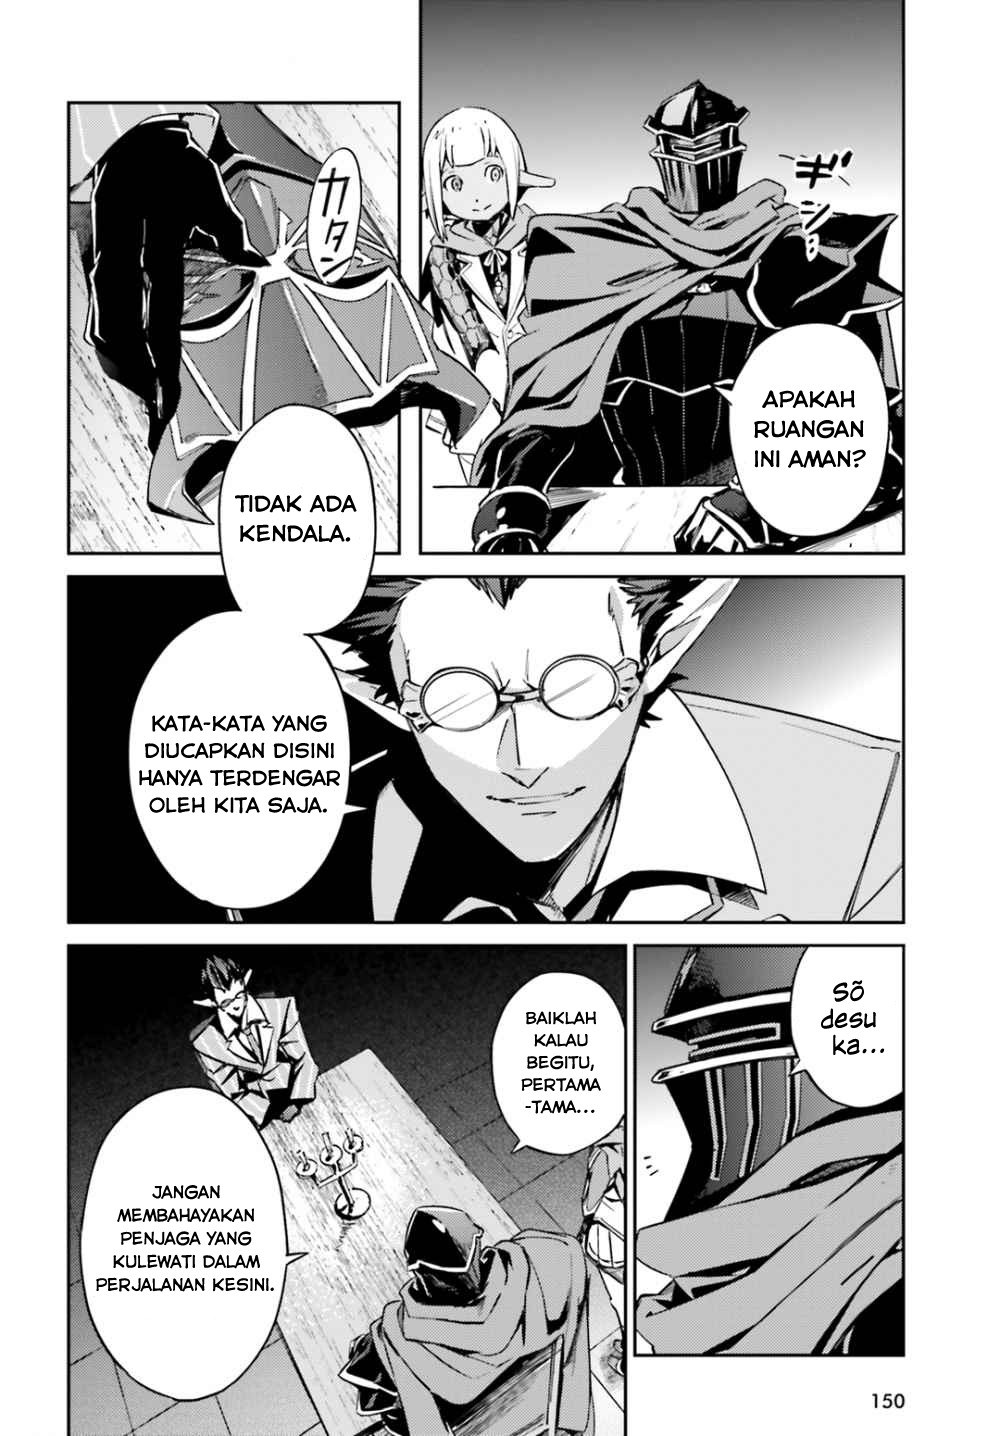 Overlord Chapter 50 39